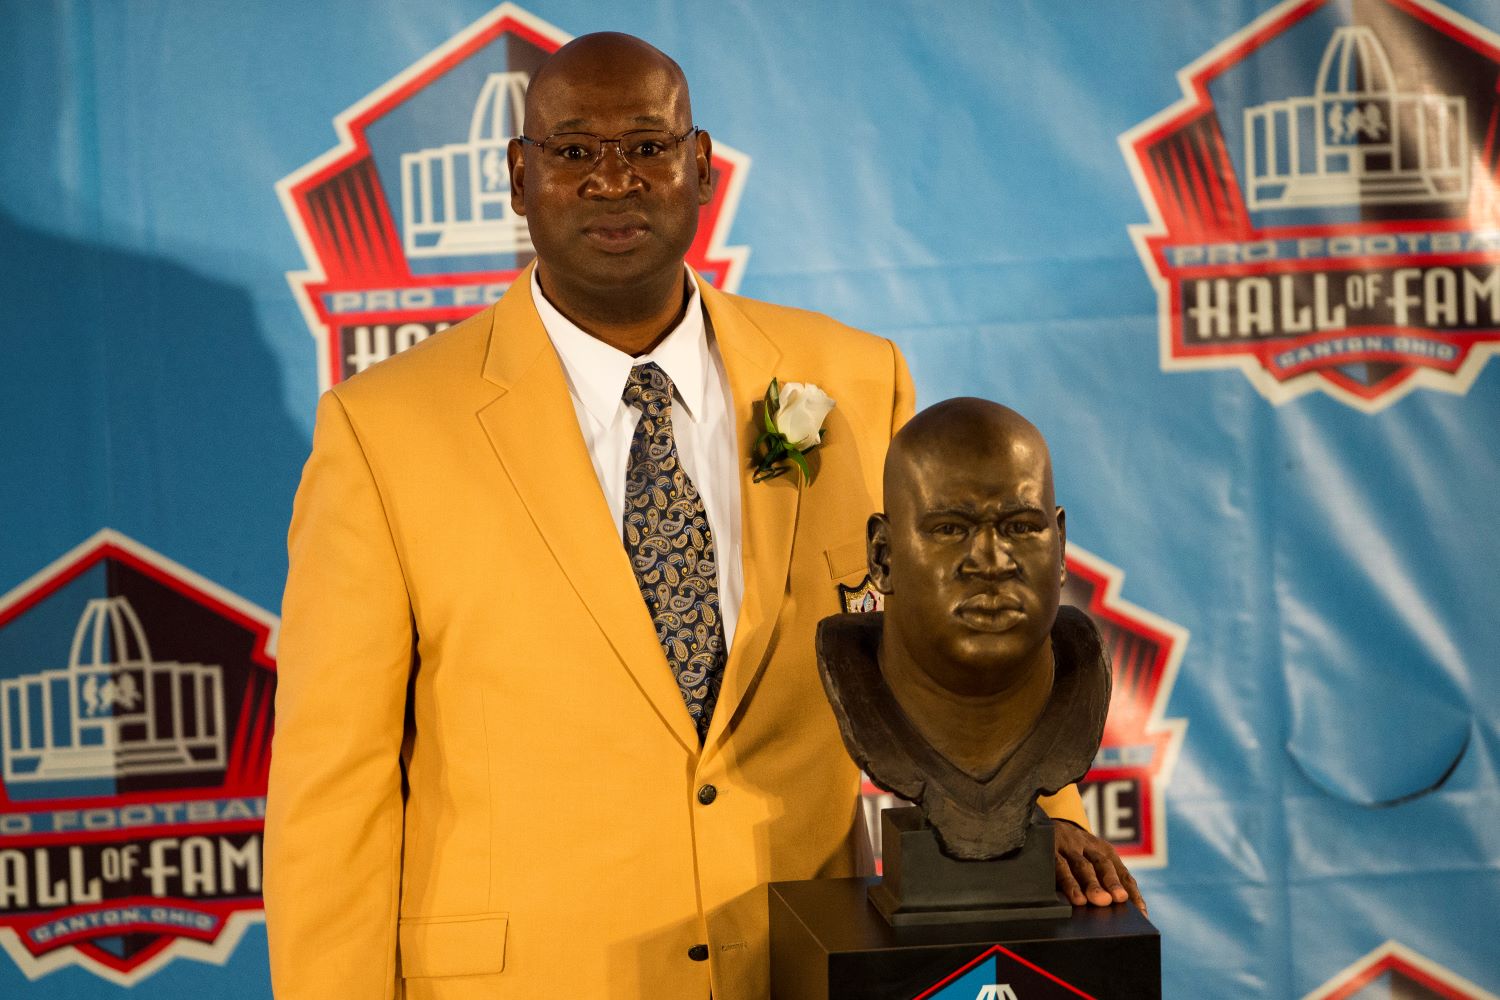 Cortez Kennedy got inducted into the Pro Football Hall of Fame in 2012. Just five years later, the Seahawks legend died at the age of 48.